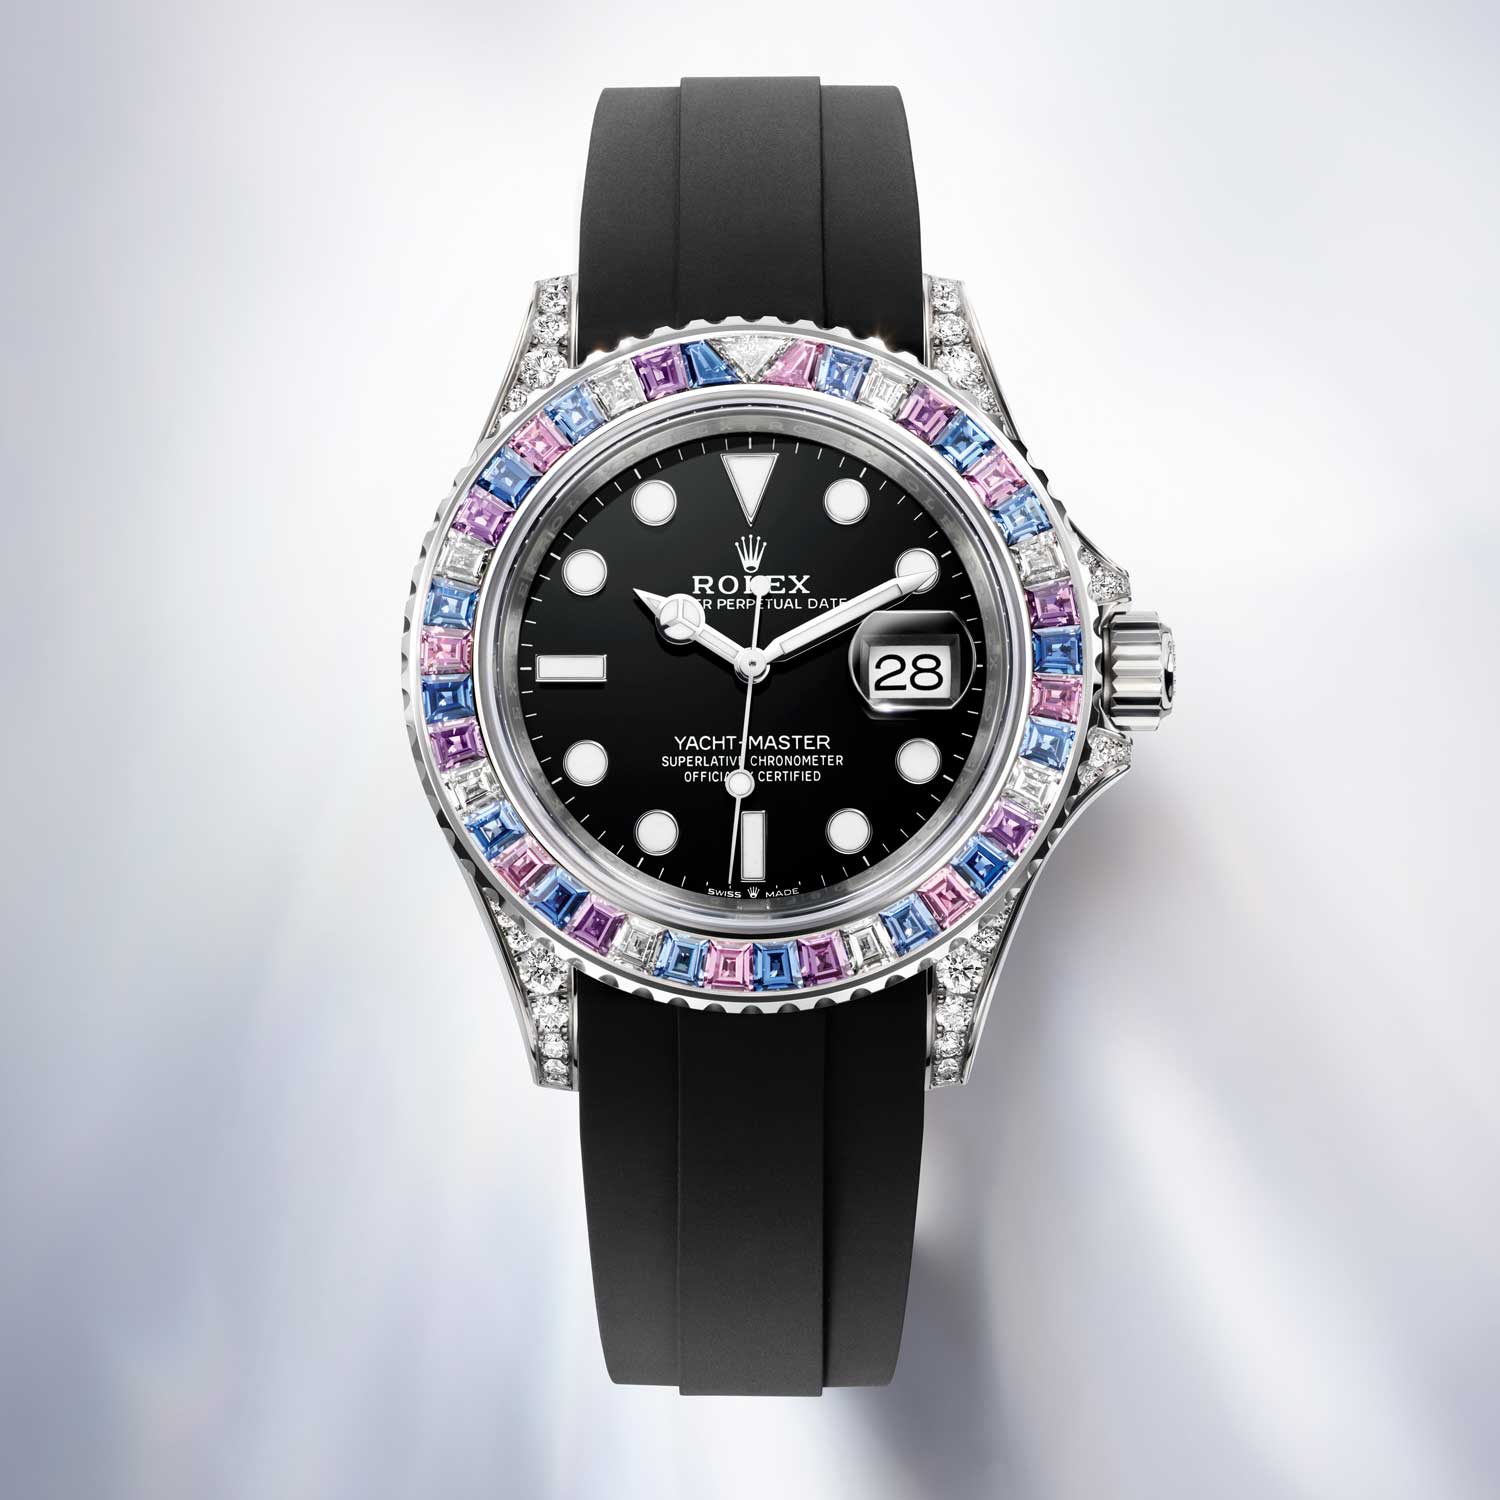 The new Rolex Oyster Perpetual GMT-Master II has its bezel, set with diamonds and sapphires in tones of blue, silver and pink, inspired by the aurora borealis and the glow of dawn